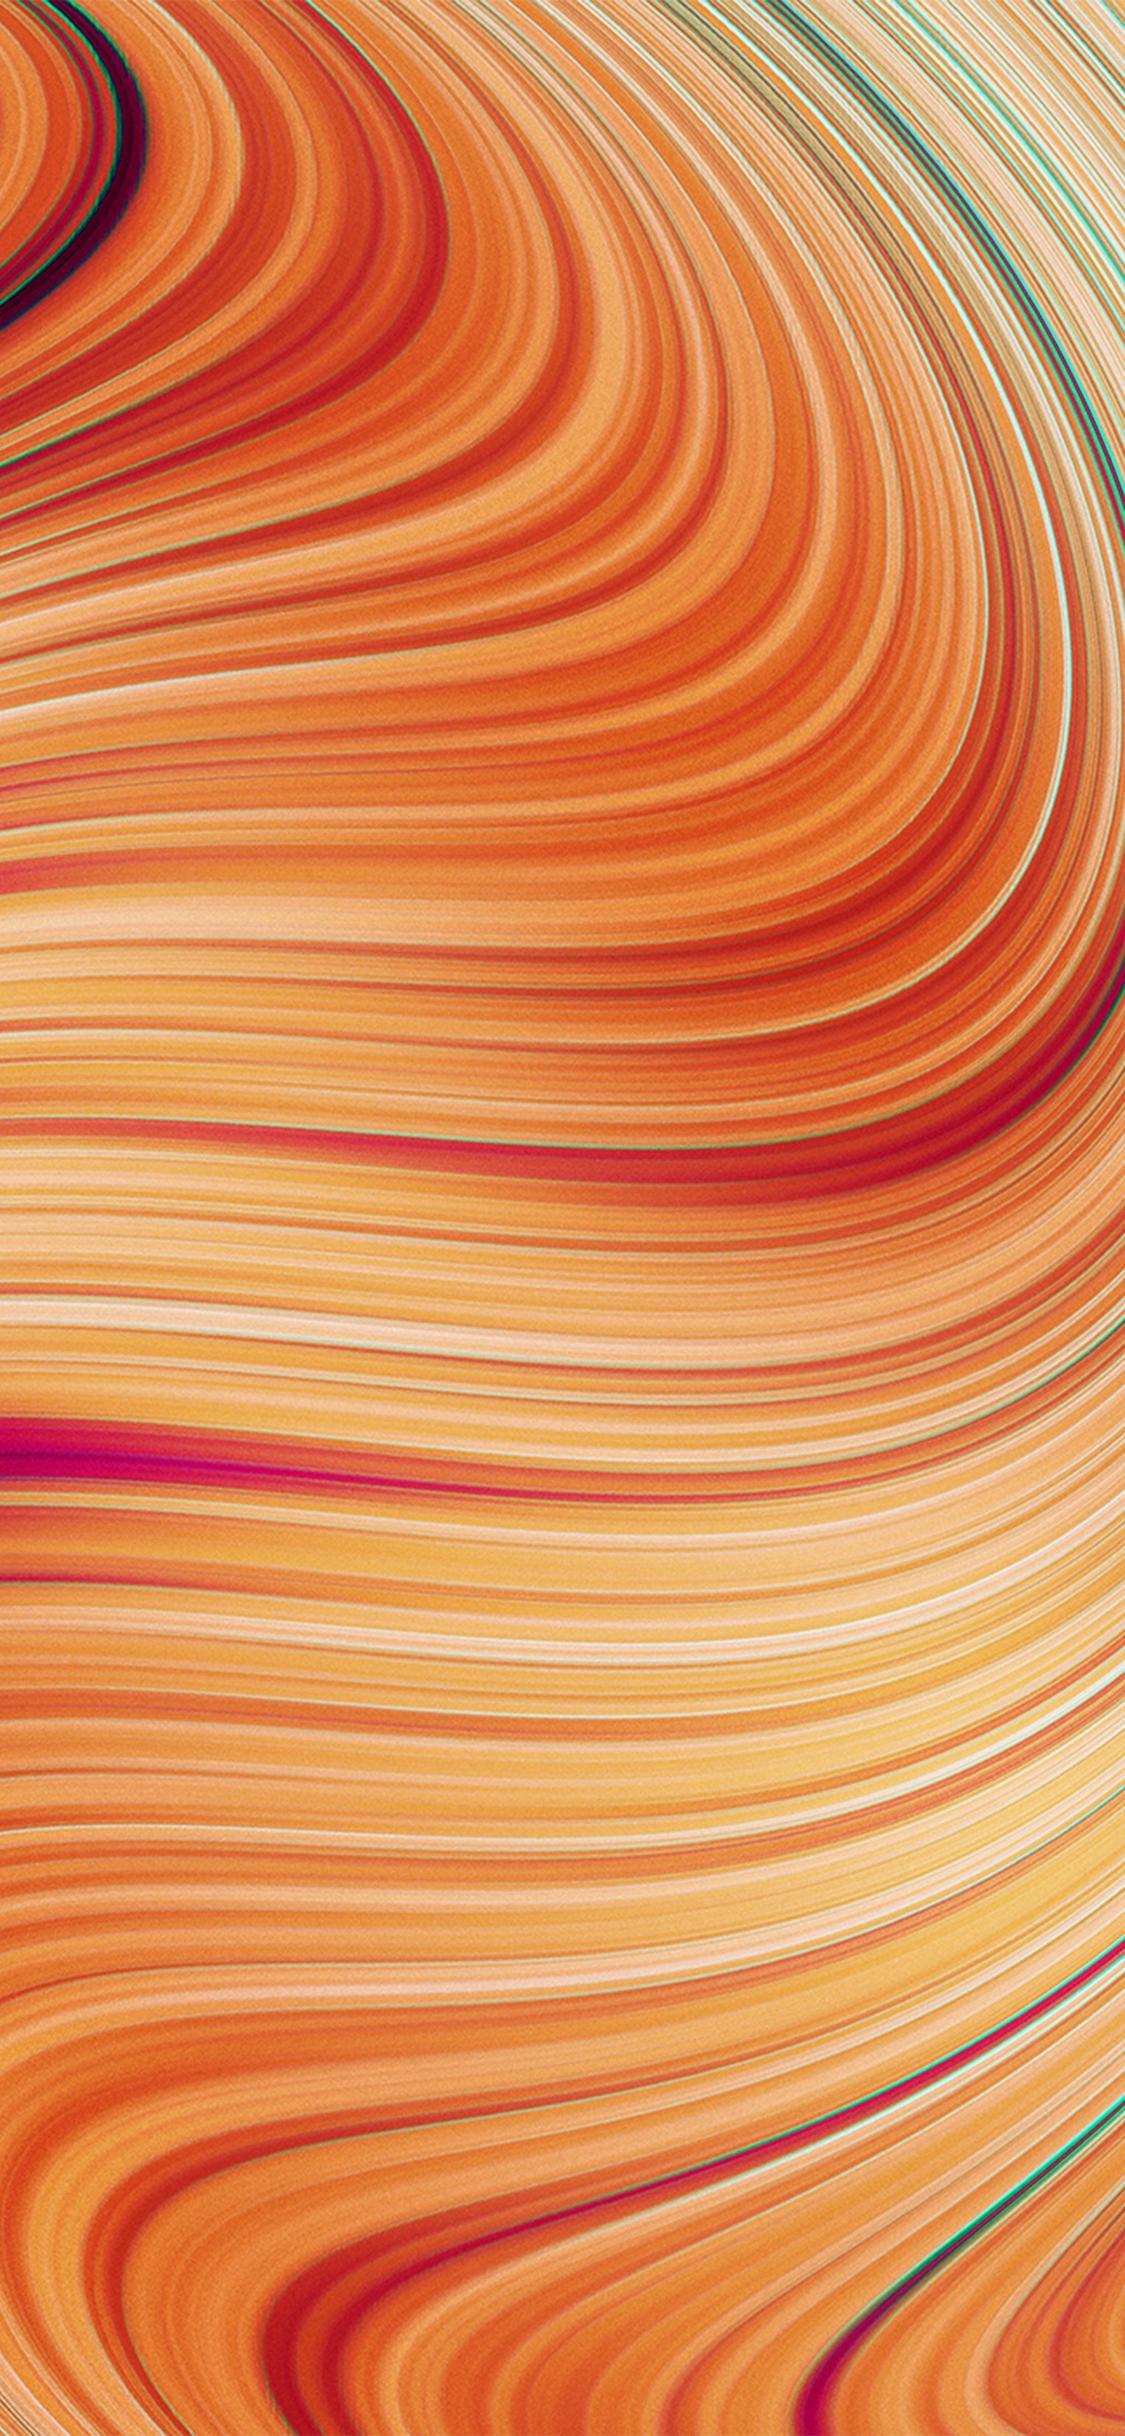 Curve Art Red Pattern Background iPhone X Wallpaper Free Download